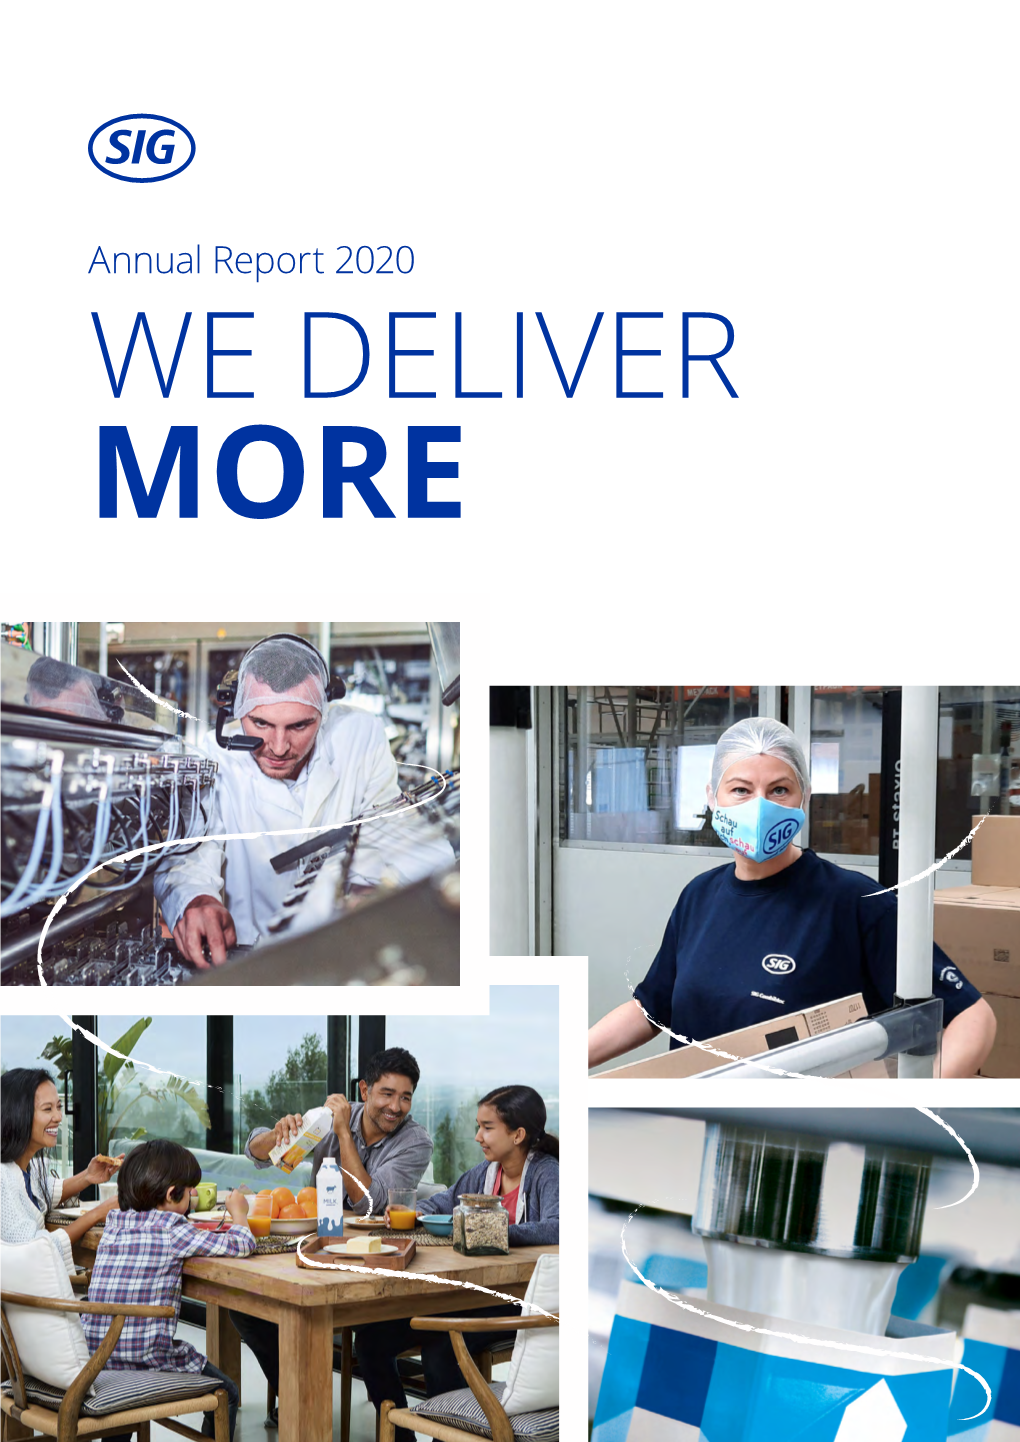 Annual Report 2020 WE DELIVER MORE WE DELIVER MORE SIG Is a Leading Systems and Solutions Provider for Aseptic Carton Packaging